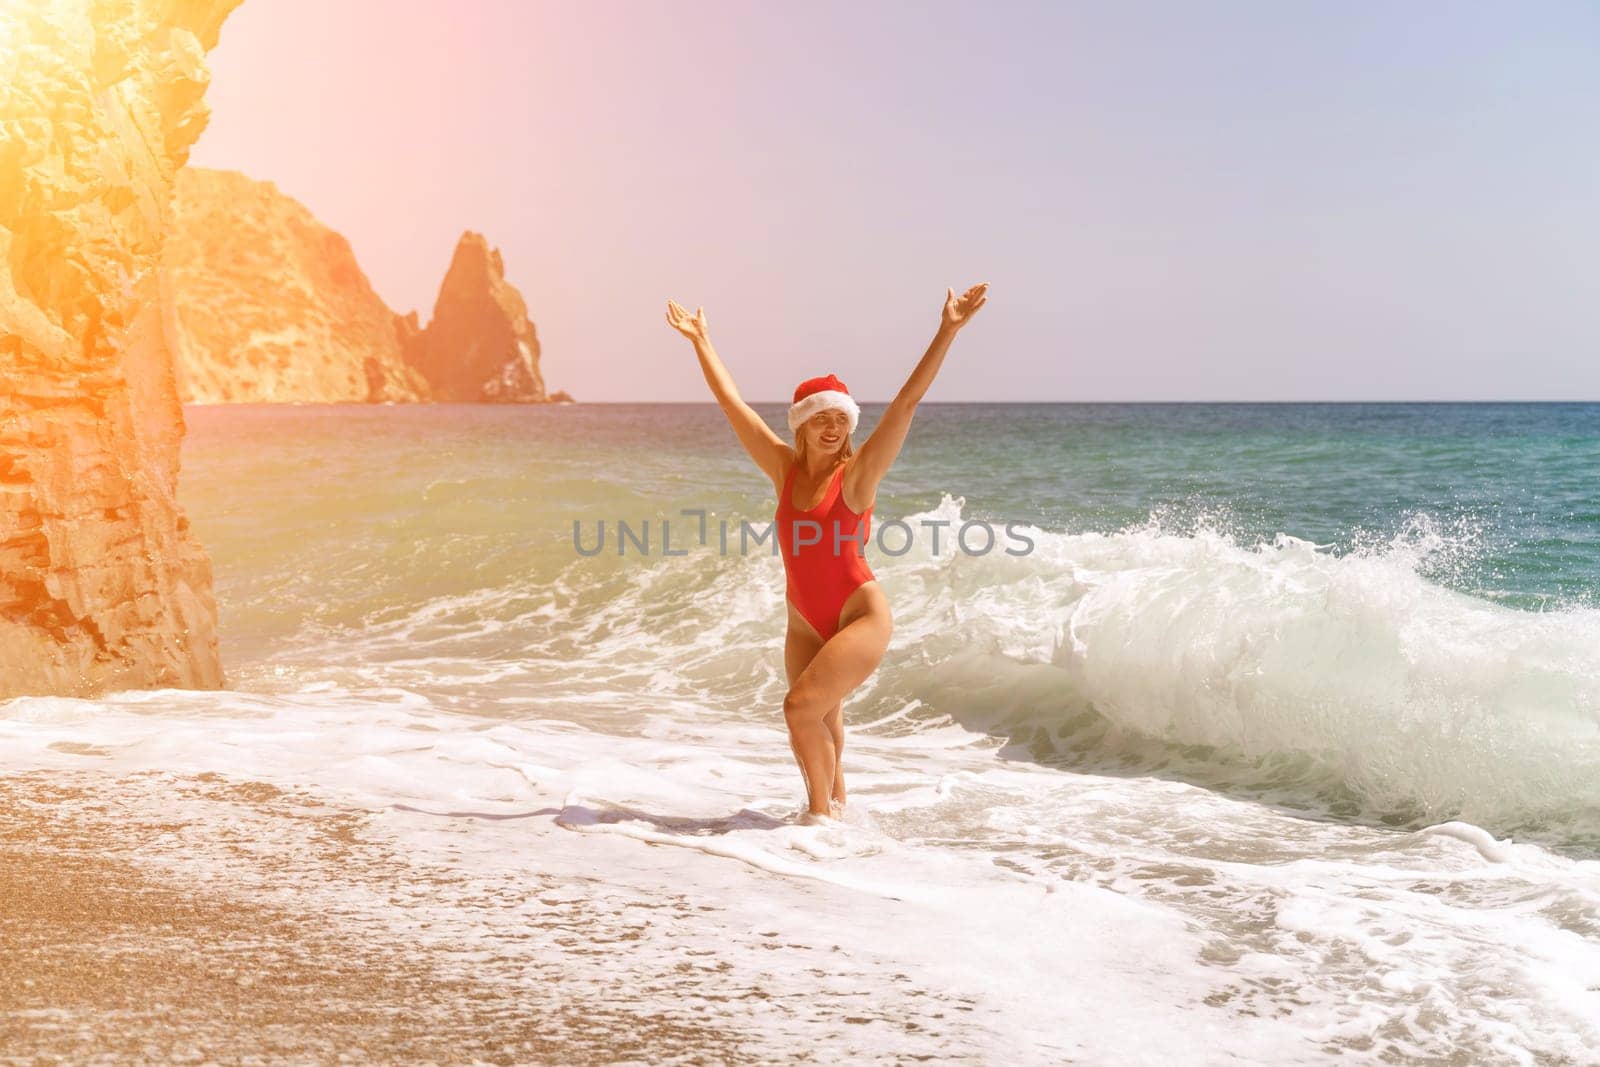 A woman in Santa hat on the seashore, dressed in a red swimsuit. New Year's celebration in a hot country